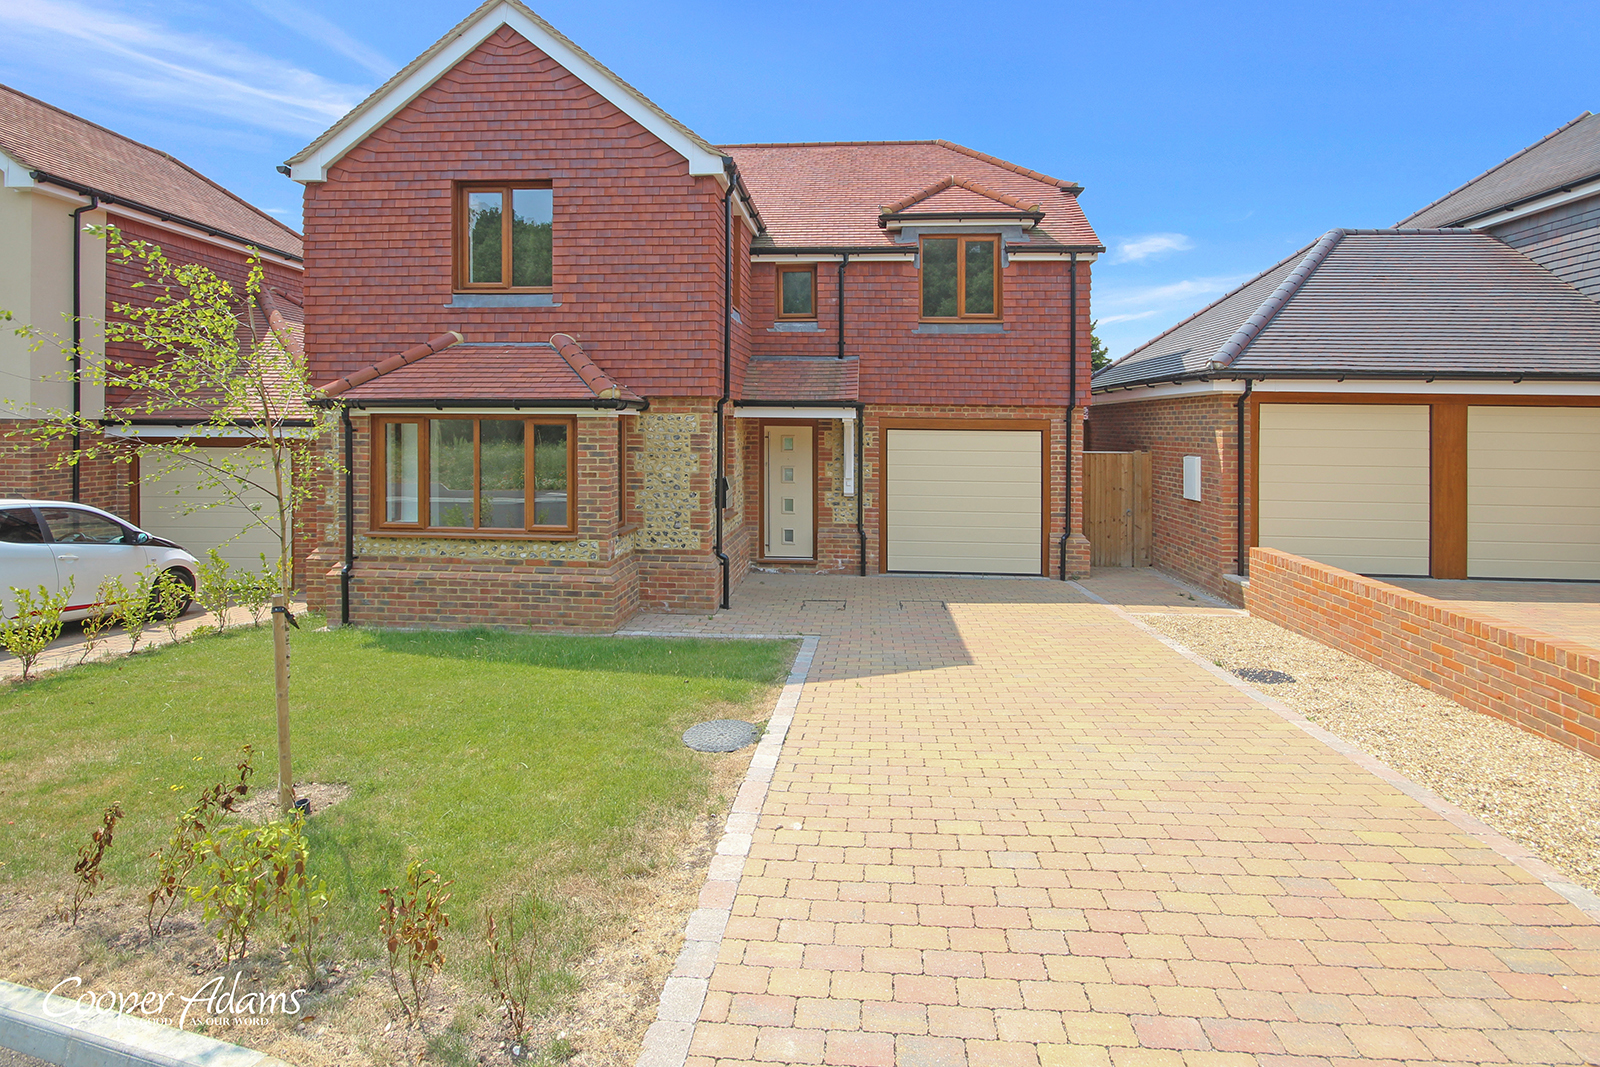 4 bed house for sale in Starling View, Arundel Road, Angmering 0